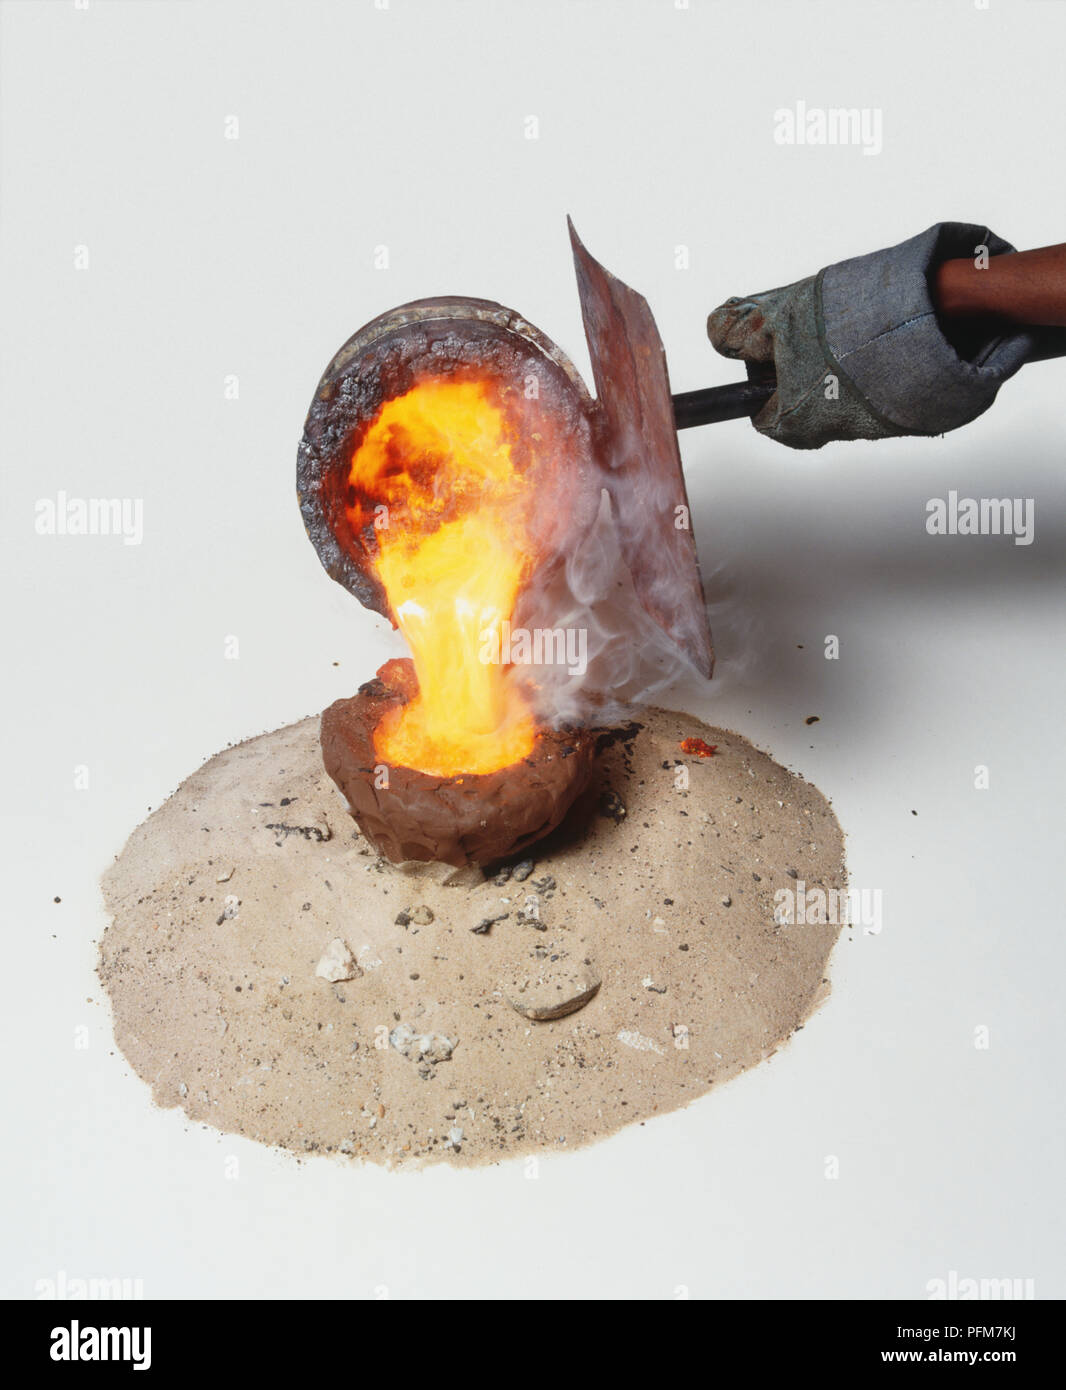 Pouring molten bronze into mould, method traditionally used in Africa Stock Photo